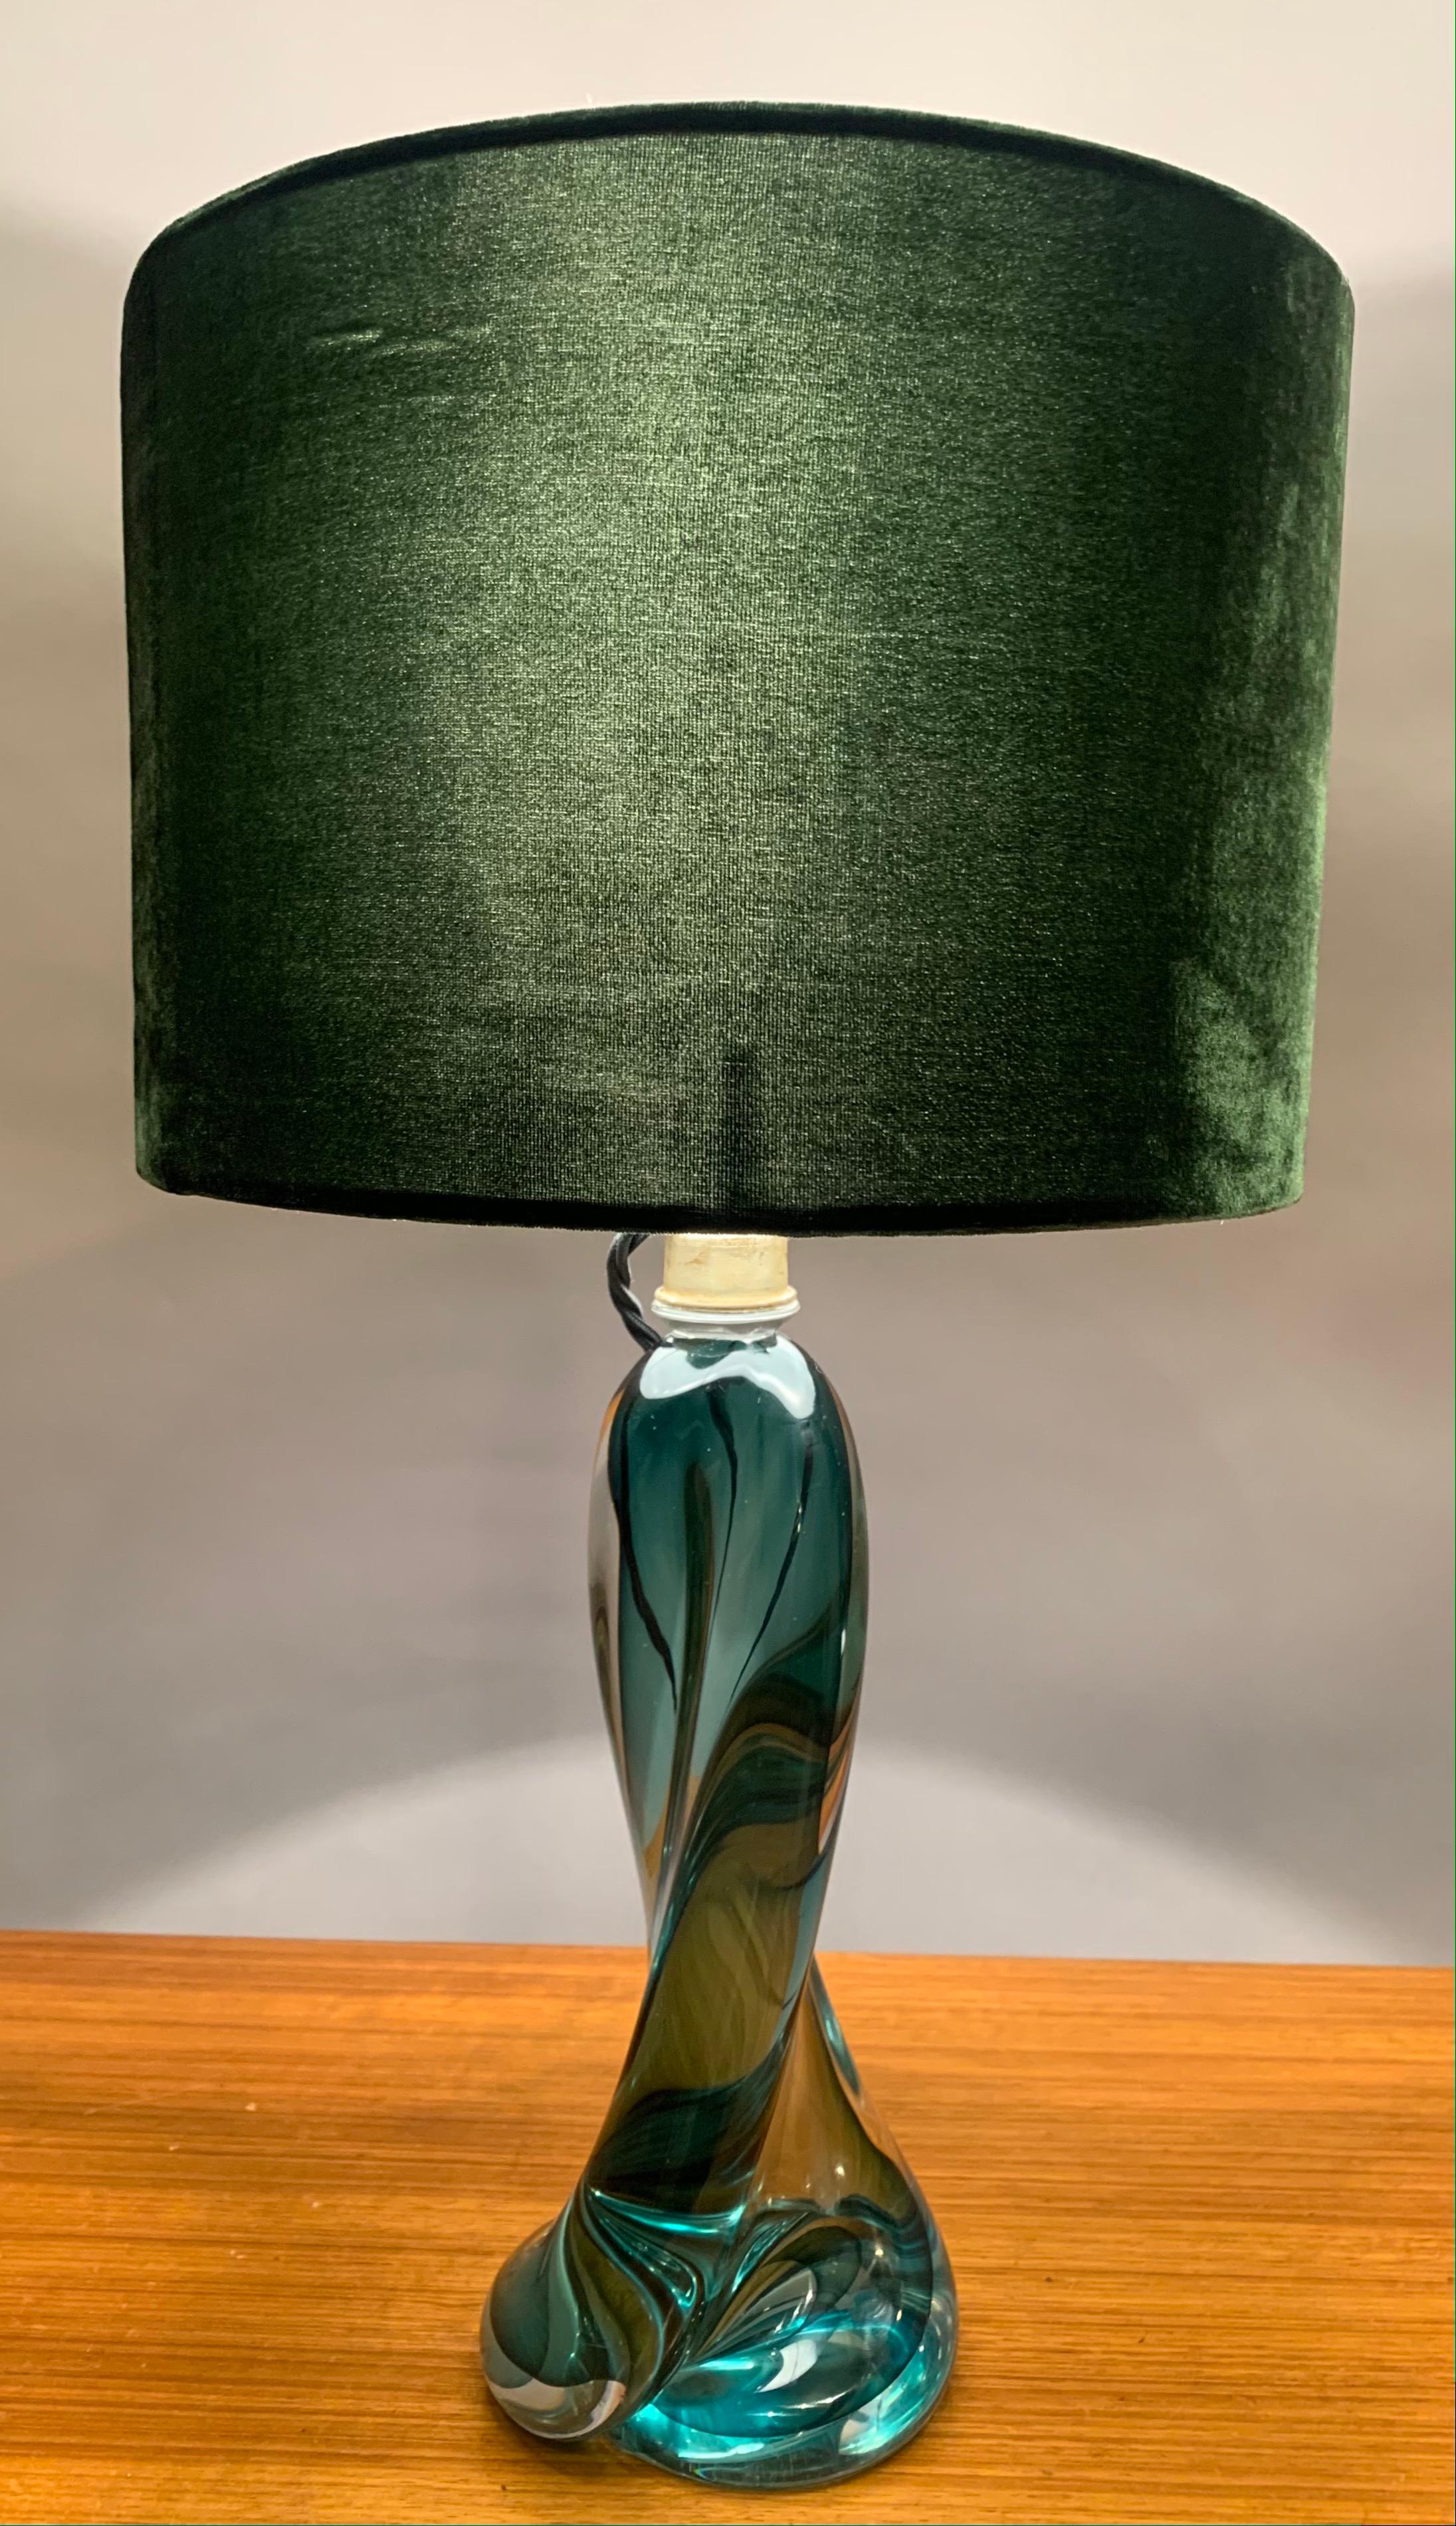 A 1950s, Belgium, Val Saint Lambert, hand-blown, dark green crystal table lamp base, encased in clear glass, which also includes the shade. This solid glass lamp is heavy and features a turned tapering swirled design which widens towards the base.